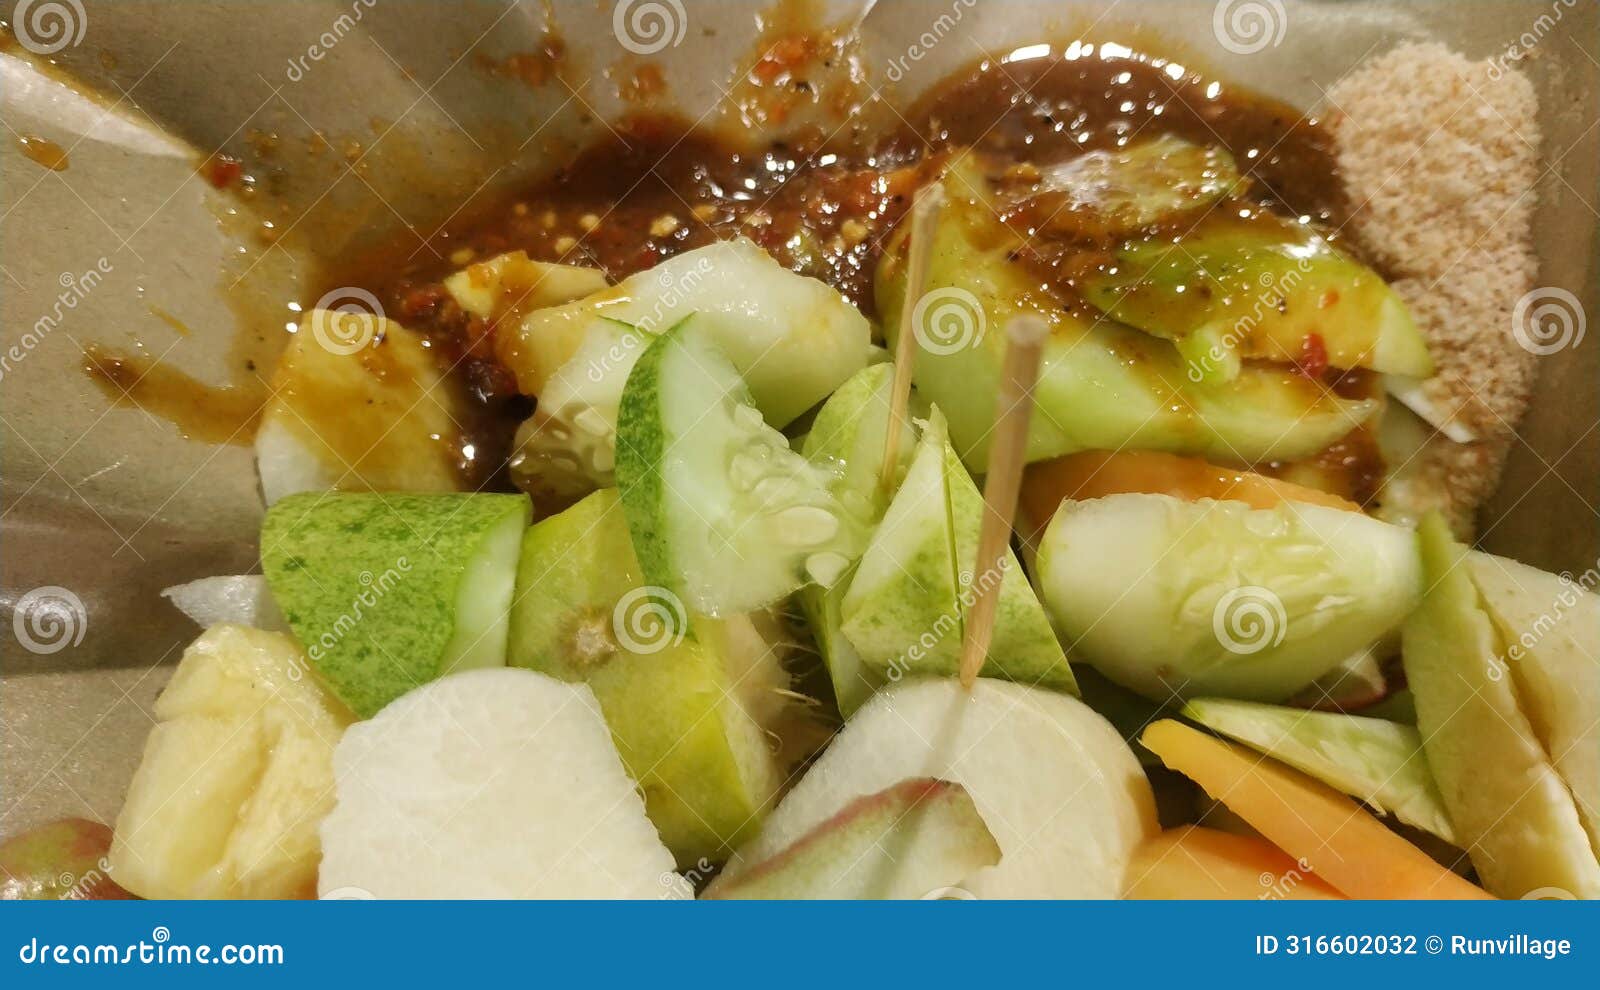 rujak buah or indonesian mixed fruit salad, served with spicy brown sugar sauce and ground peanuts